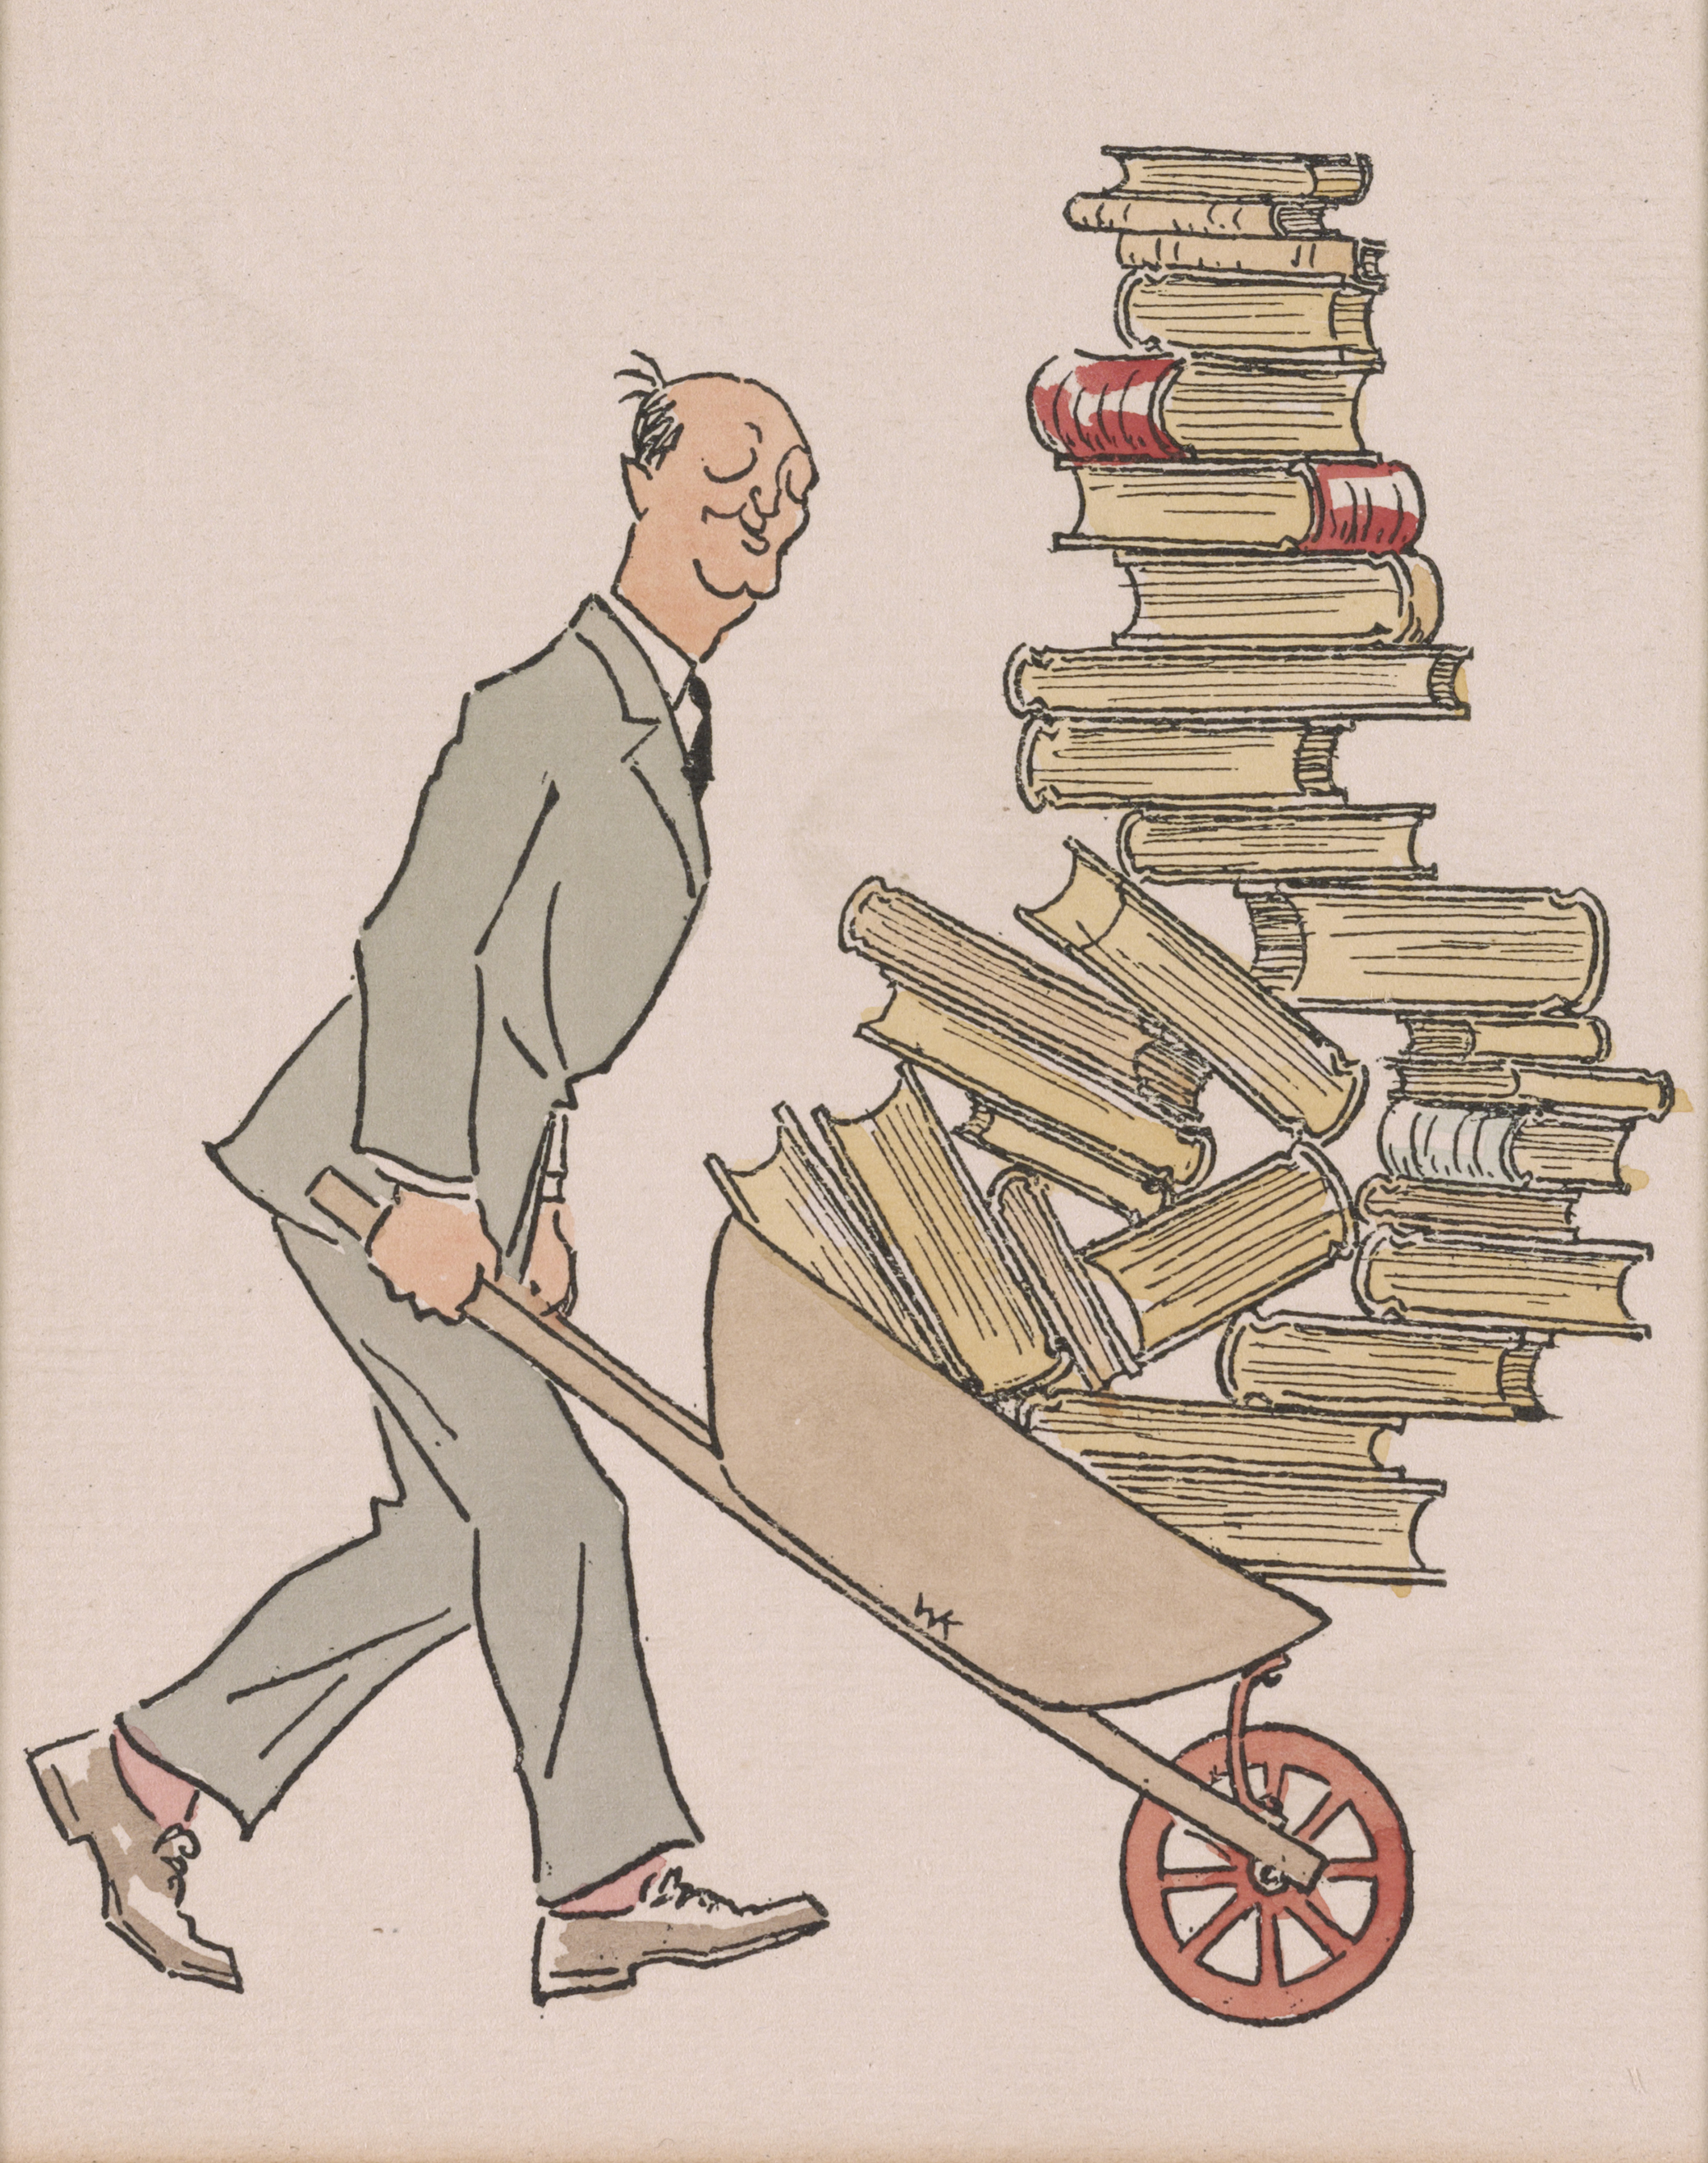 Philadelphia bookseller George J.C. Grasberger pushing a wheelbarrow piled high with books, c. 1930. Library of Congress, Prints and Photographs Division.